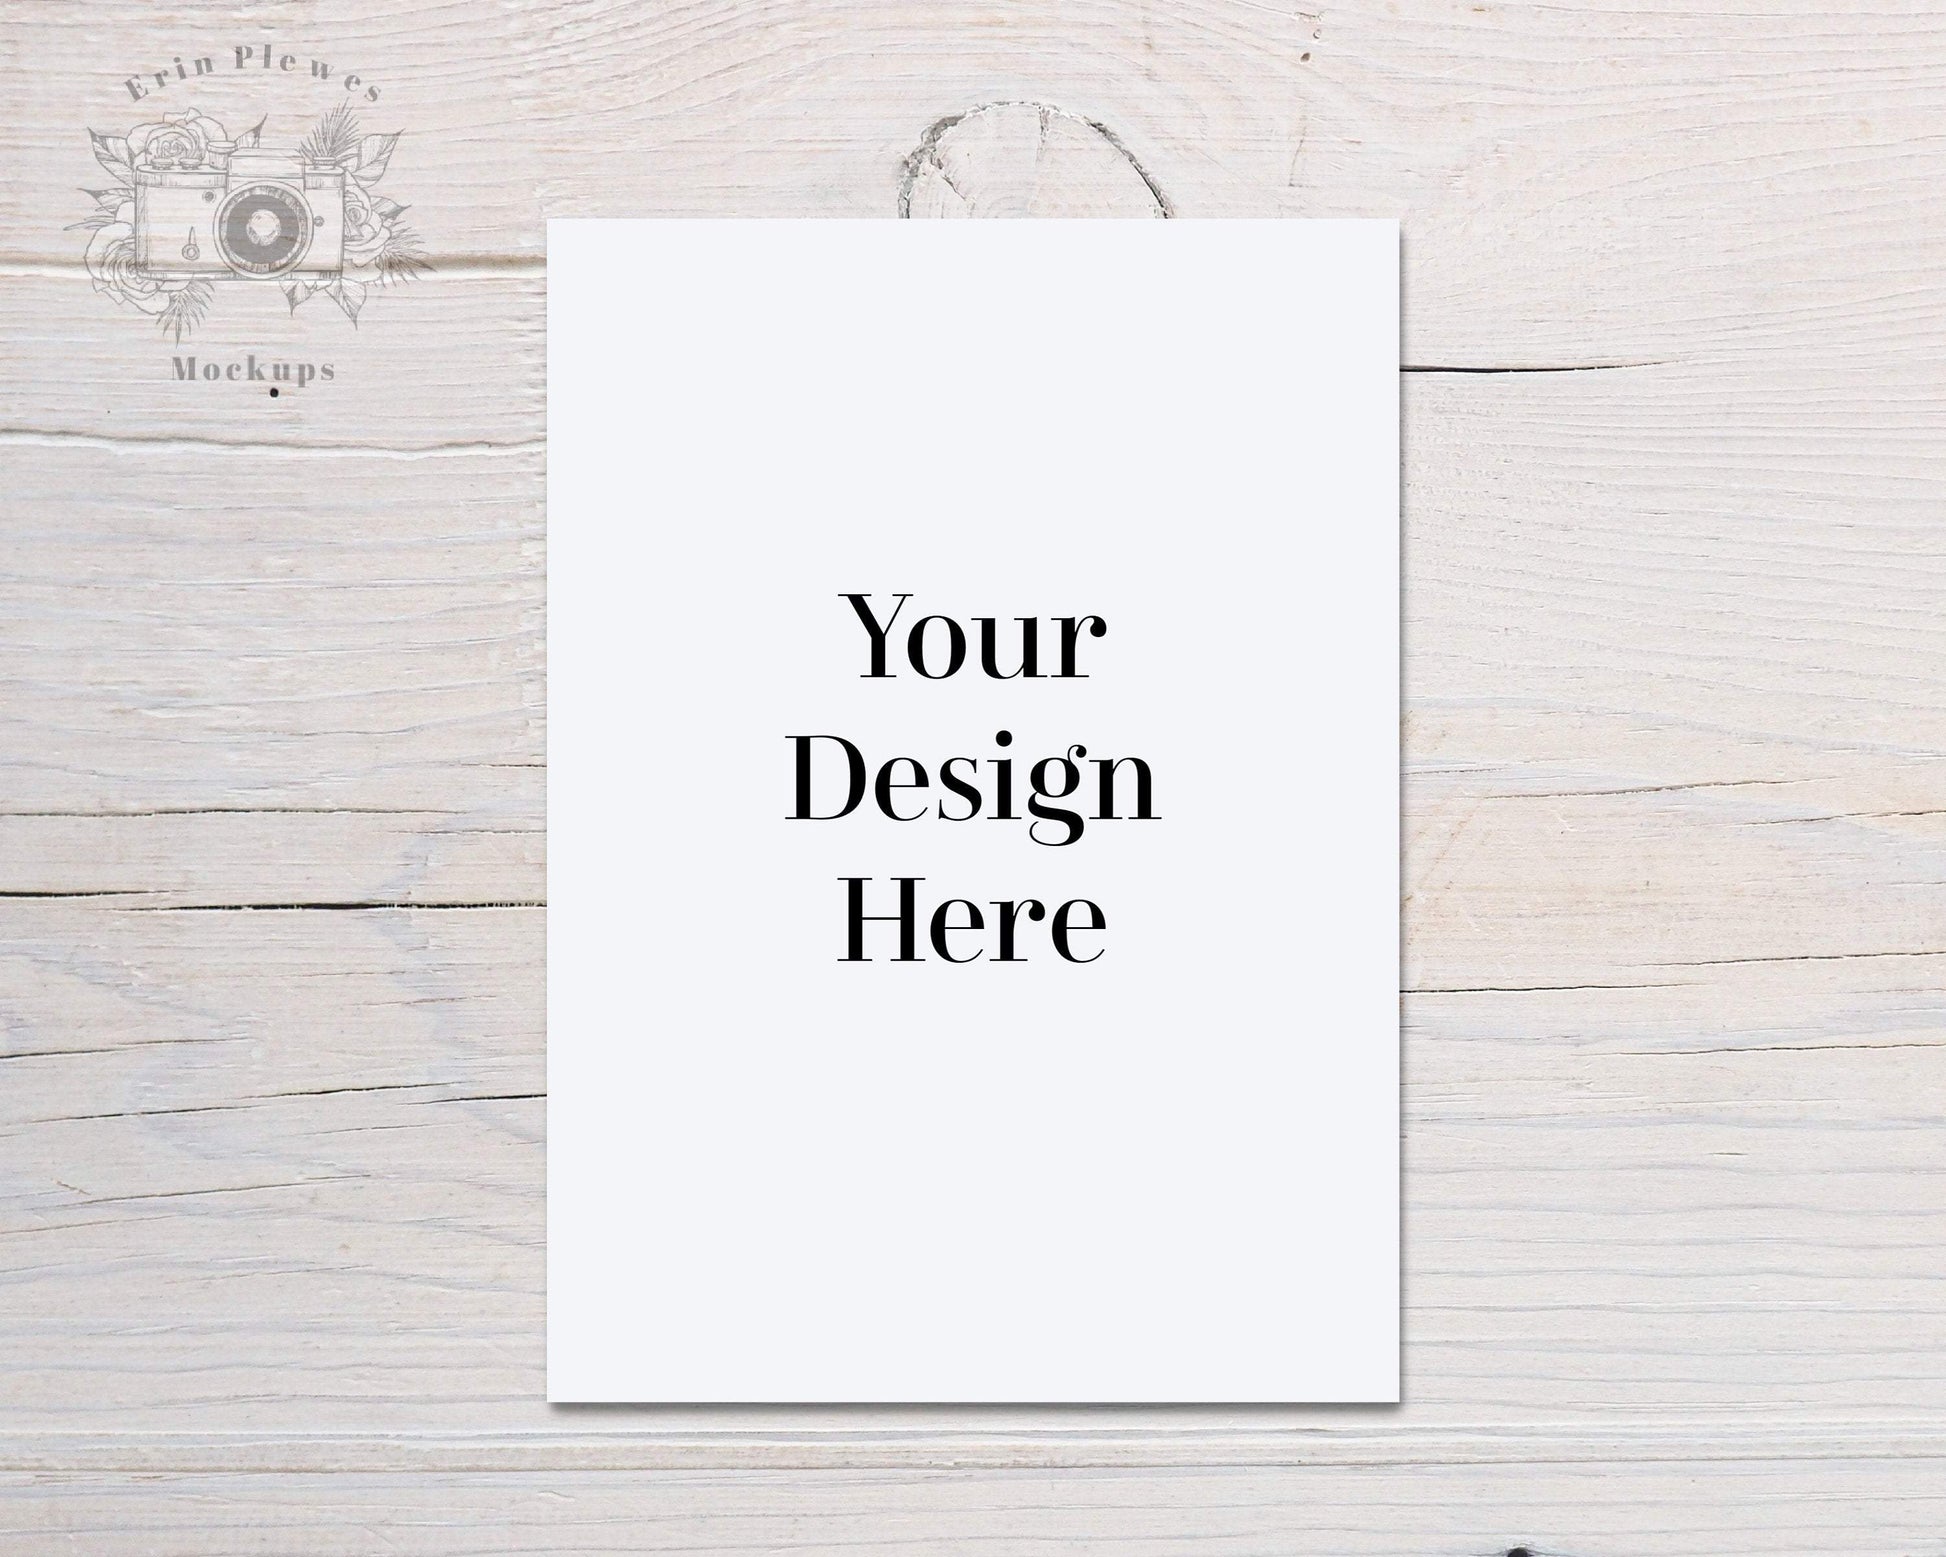 Erin Plewes Mockups Greeting card mockup A6, Card mock-up for rustic wedding thank you note on white wood, Jpeg Instant Digital Download Template